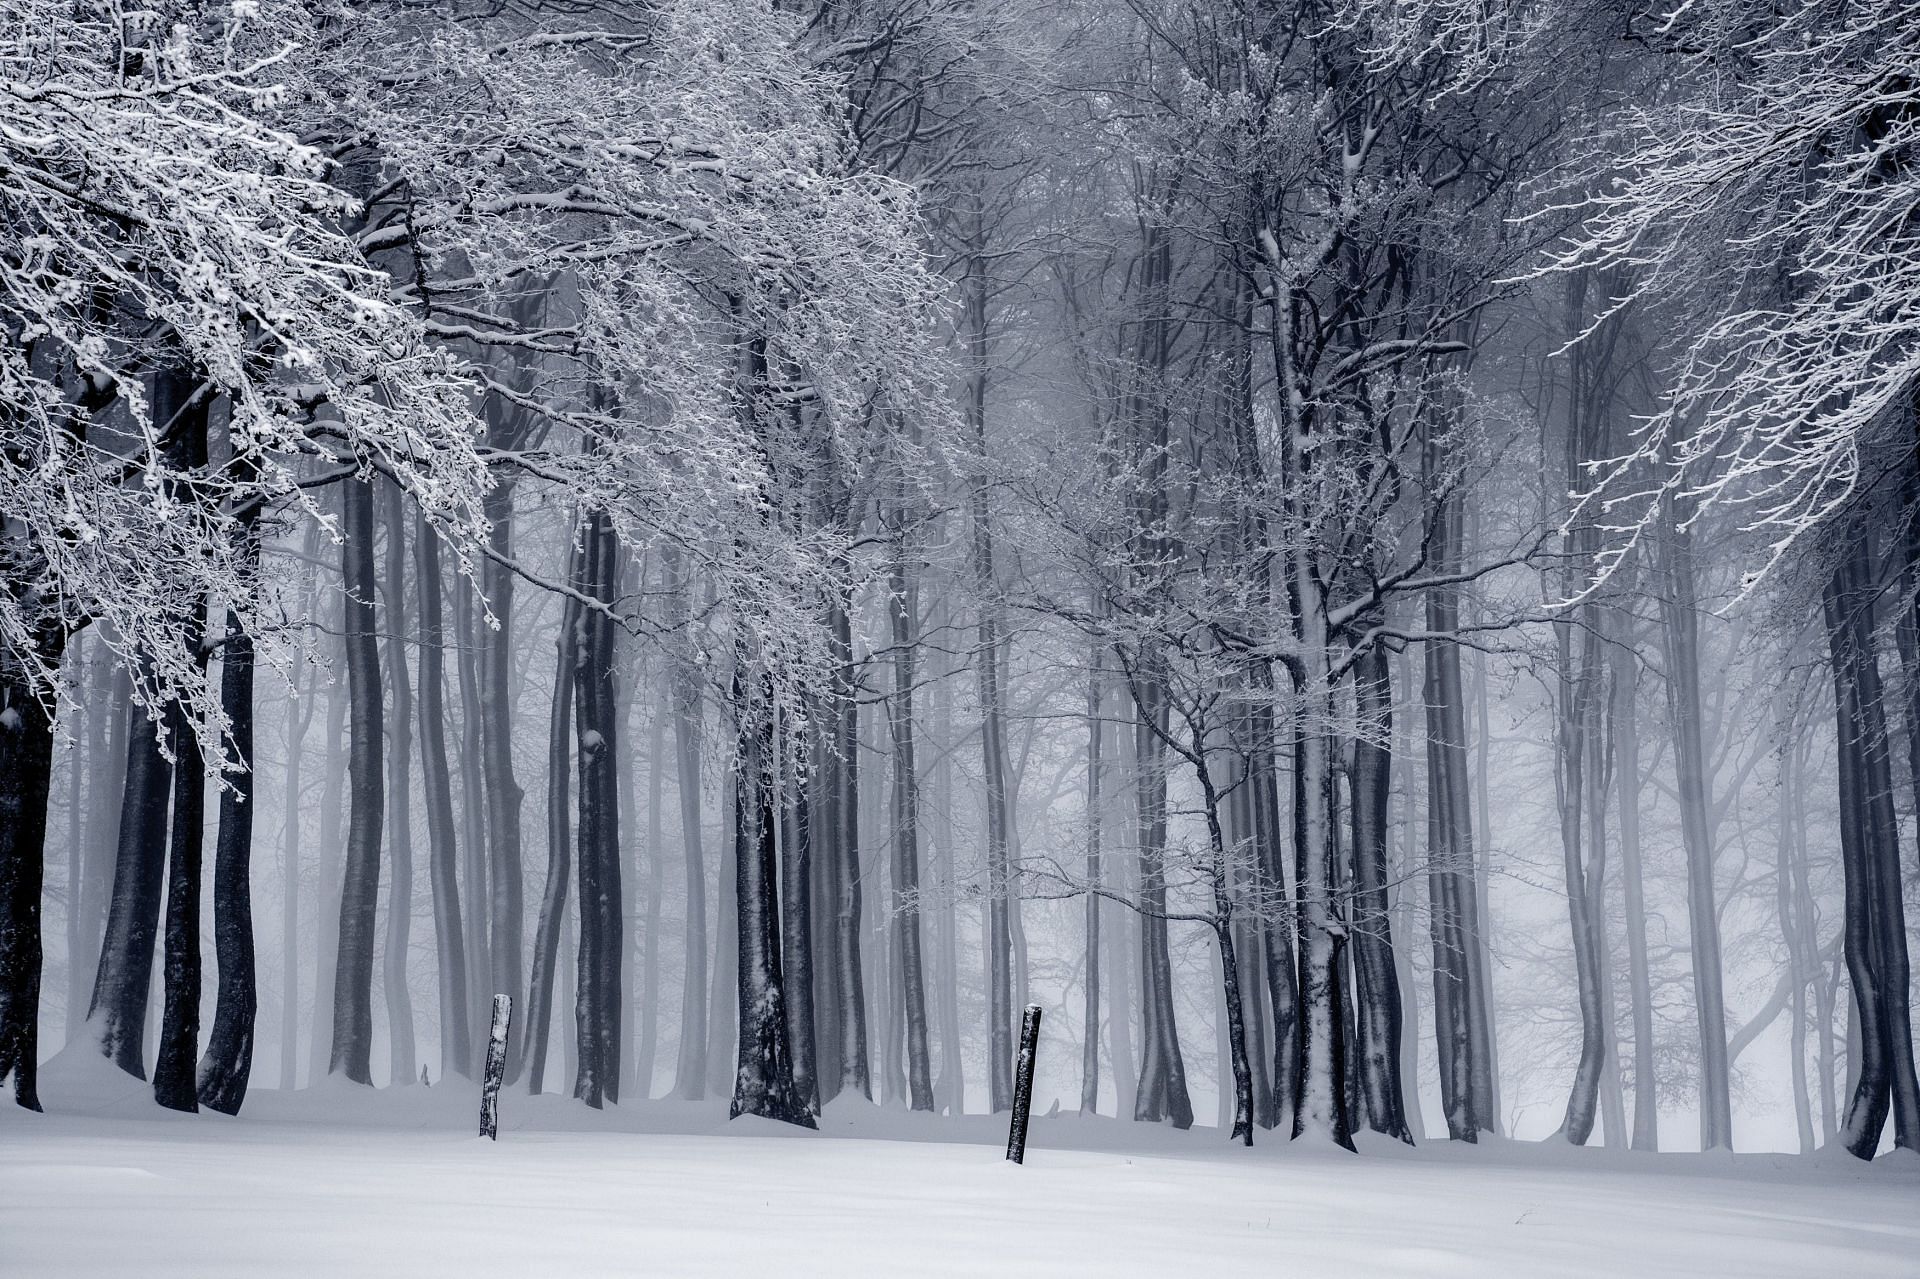 Heart attacks in cold weather (image sourced via Pexels / Photo by pixabay)